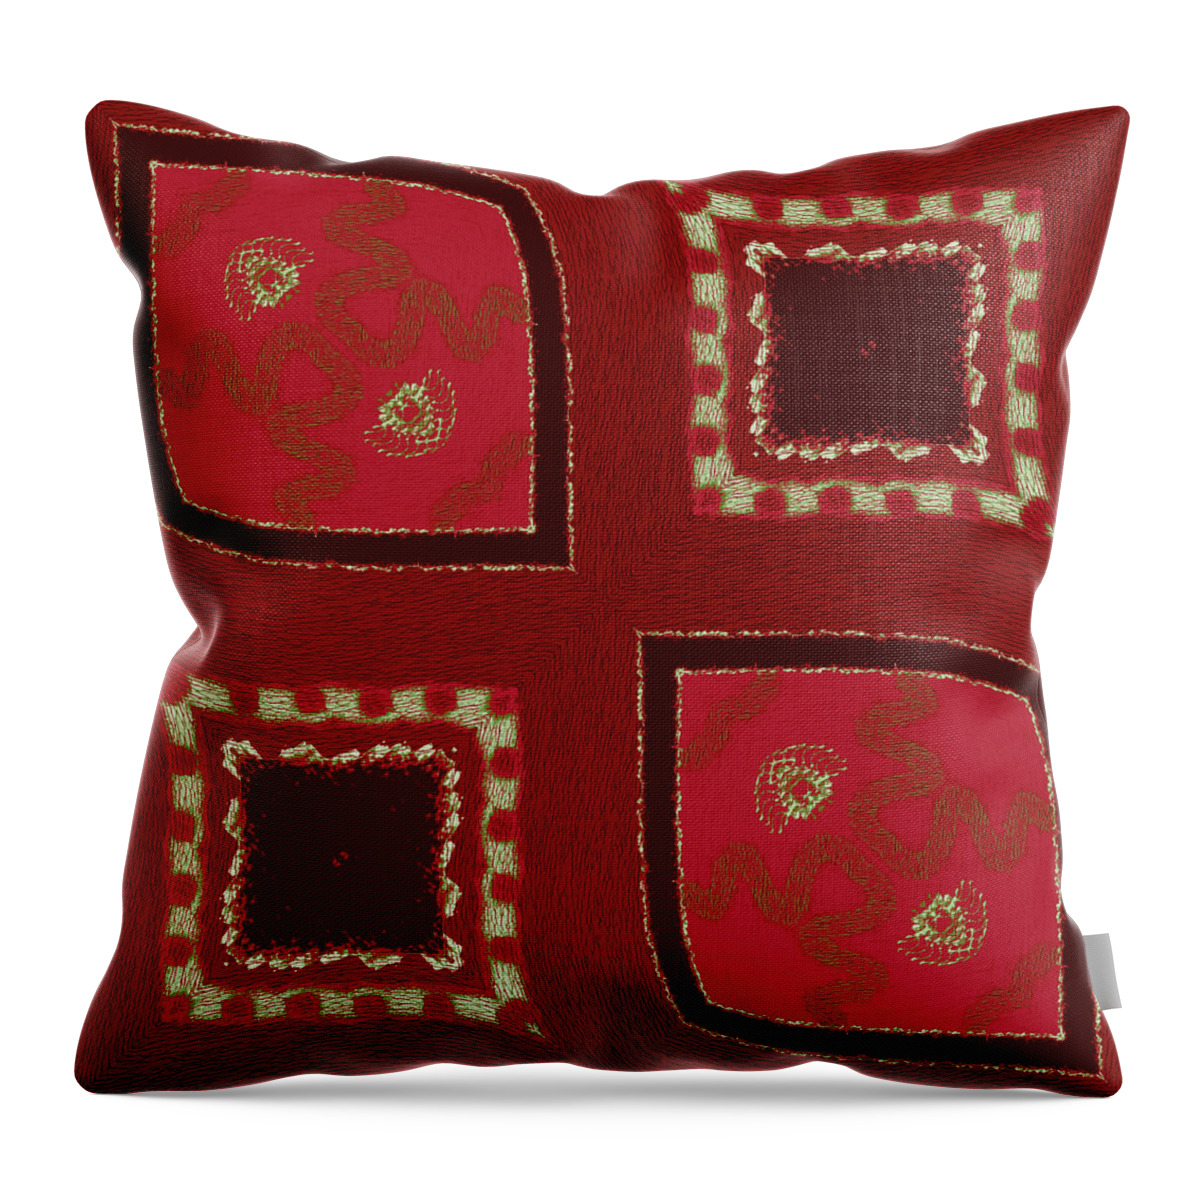 Altered Photo Throw Pillow featuring the digital art Windowpane by Bonnie Bruno